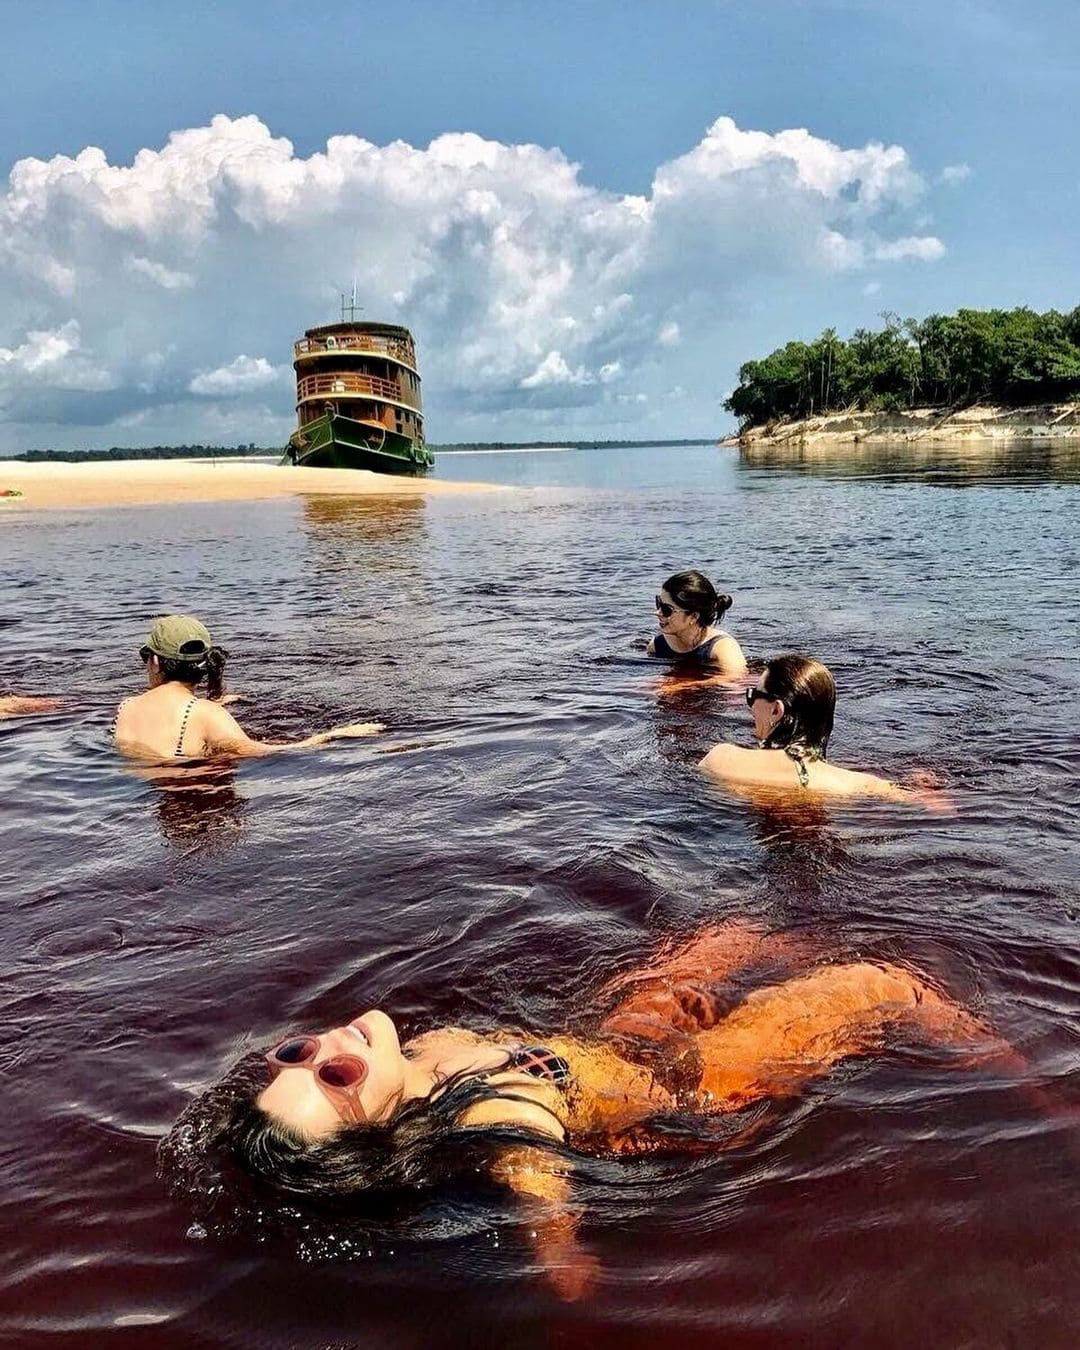 Swimming in the river - Amazon